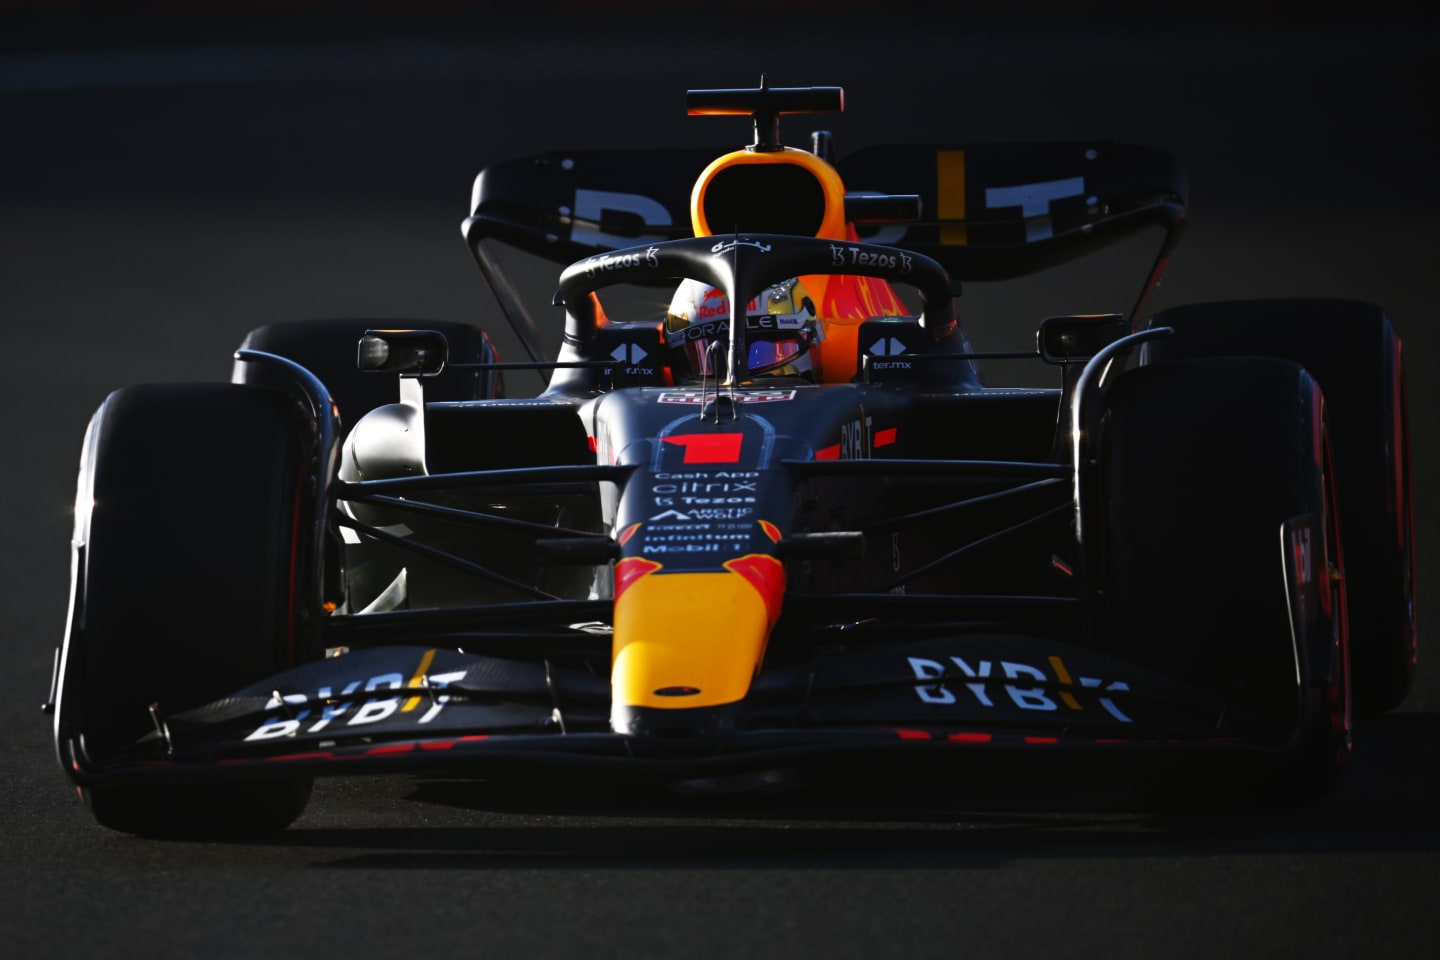 JEDDAH, SAUDI ARABIA - MARCH 25: Max Verstappen of the Netherlands driving the (1) Oracle Red Bull Racing RB18 on track during practice ahead of the F1 Grand Prix of Saudi Arabia at the Jeddah Corniche Circuit on March 25, 2022 in Jeddah, Saudi Arabia. (Photo by Clive Mason/Getty Images)